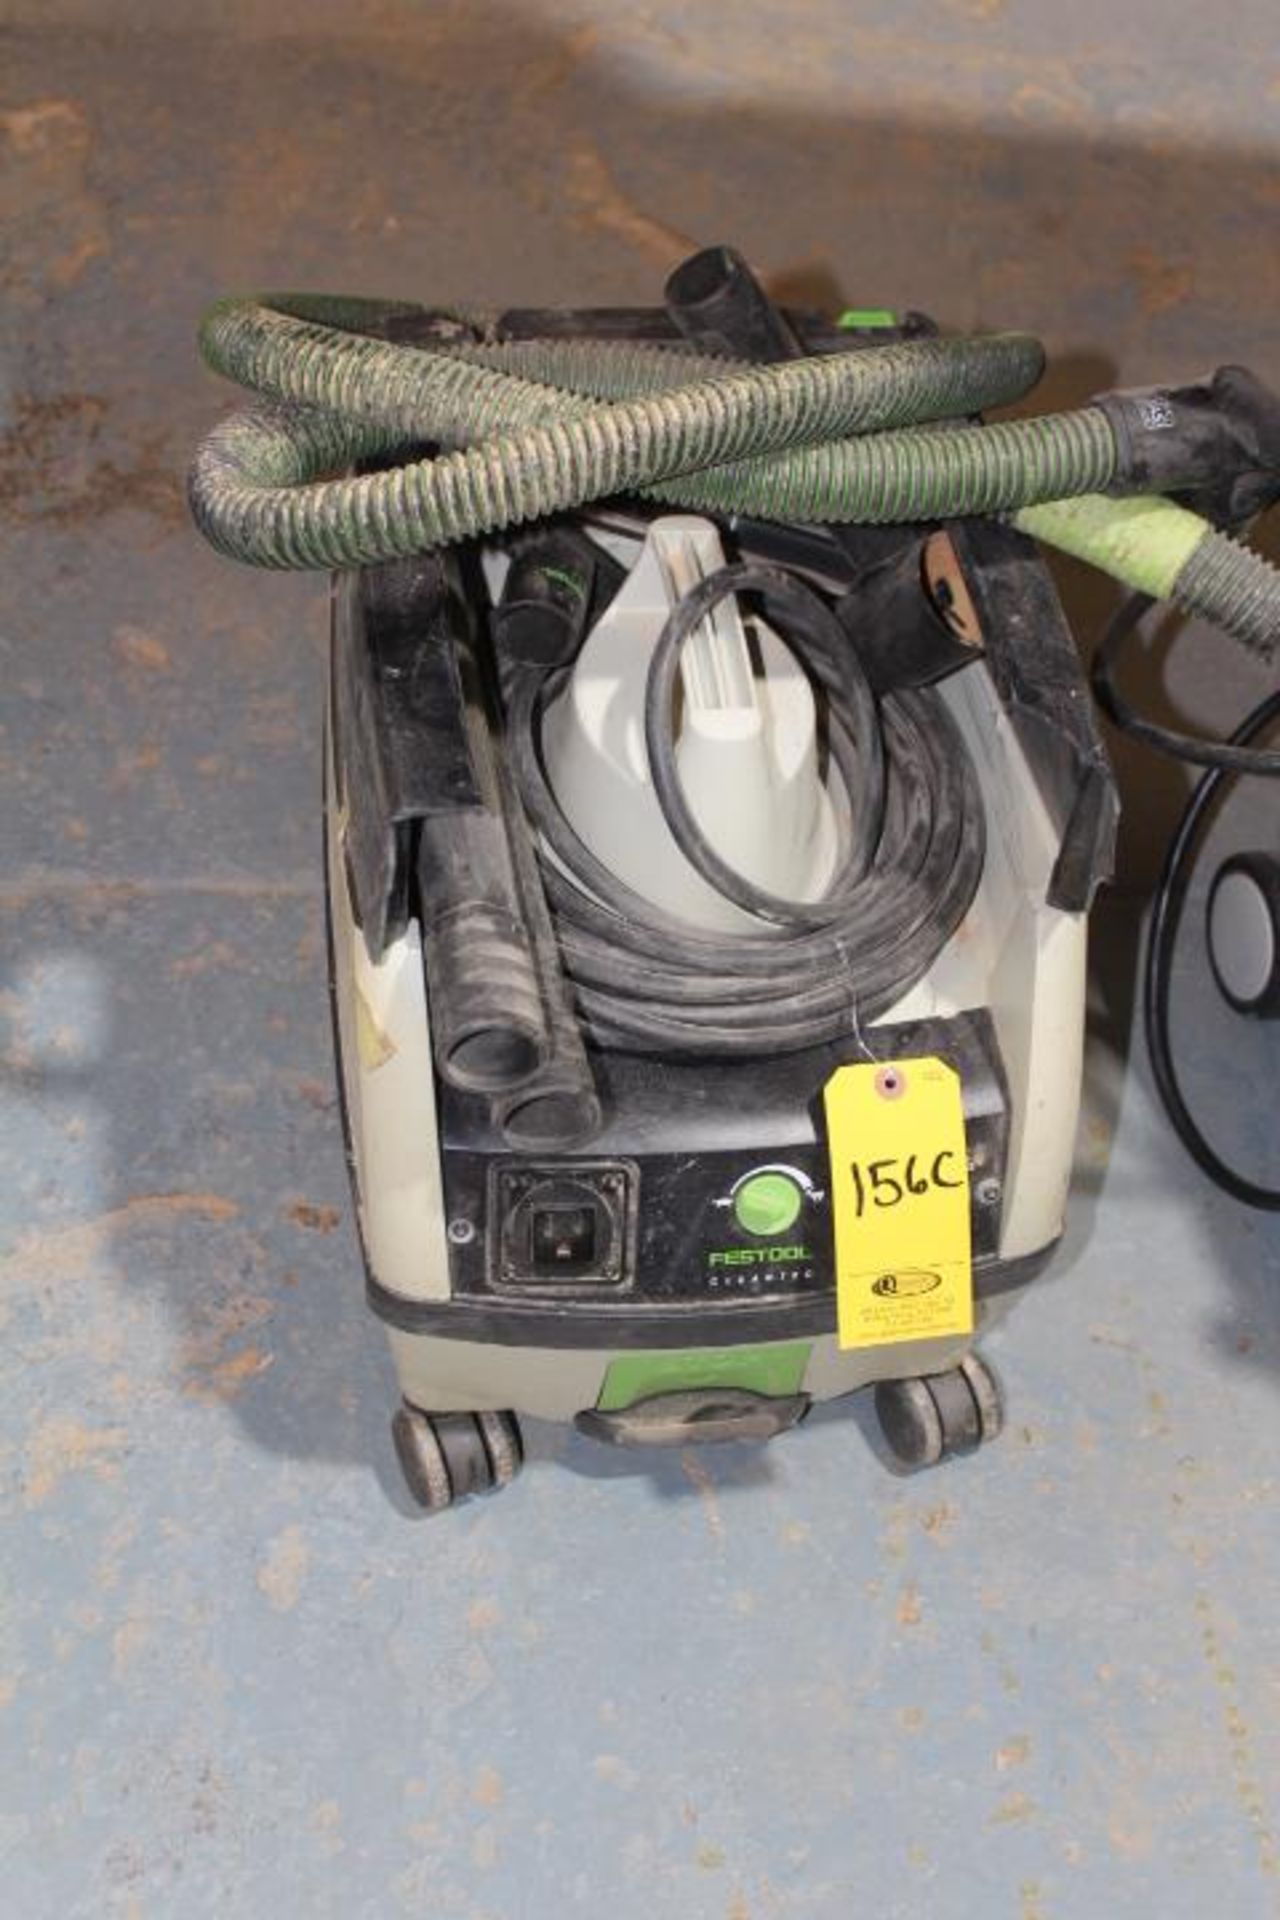 FESTOOL PORTABLE VACUUM AND ACCESSORIES-AS IS